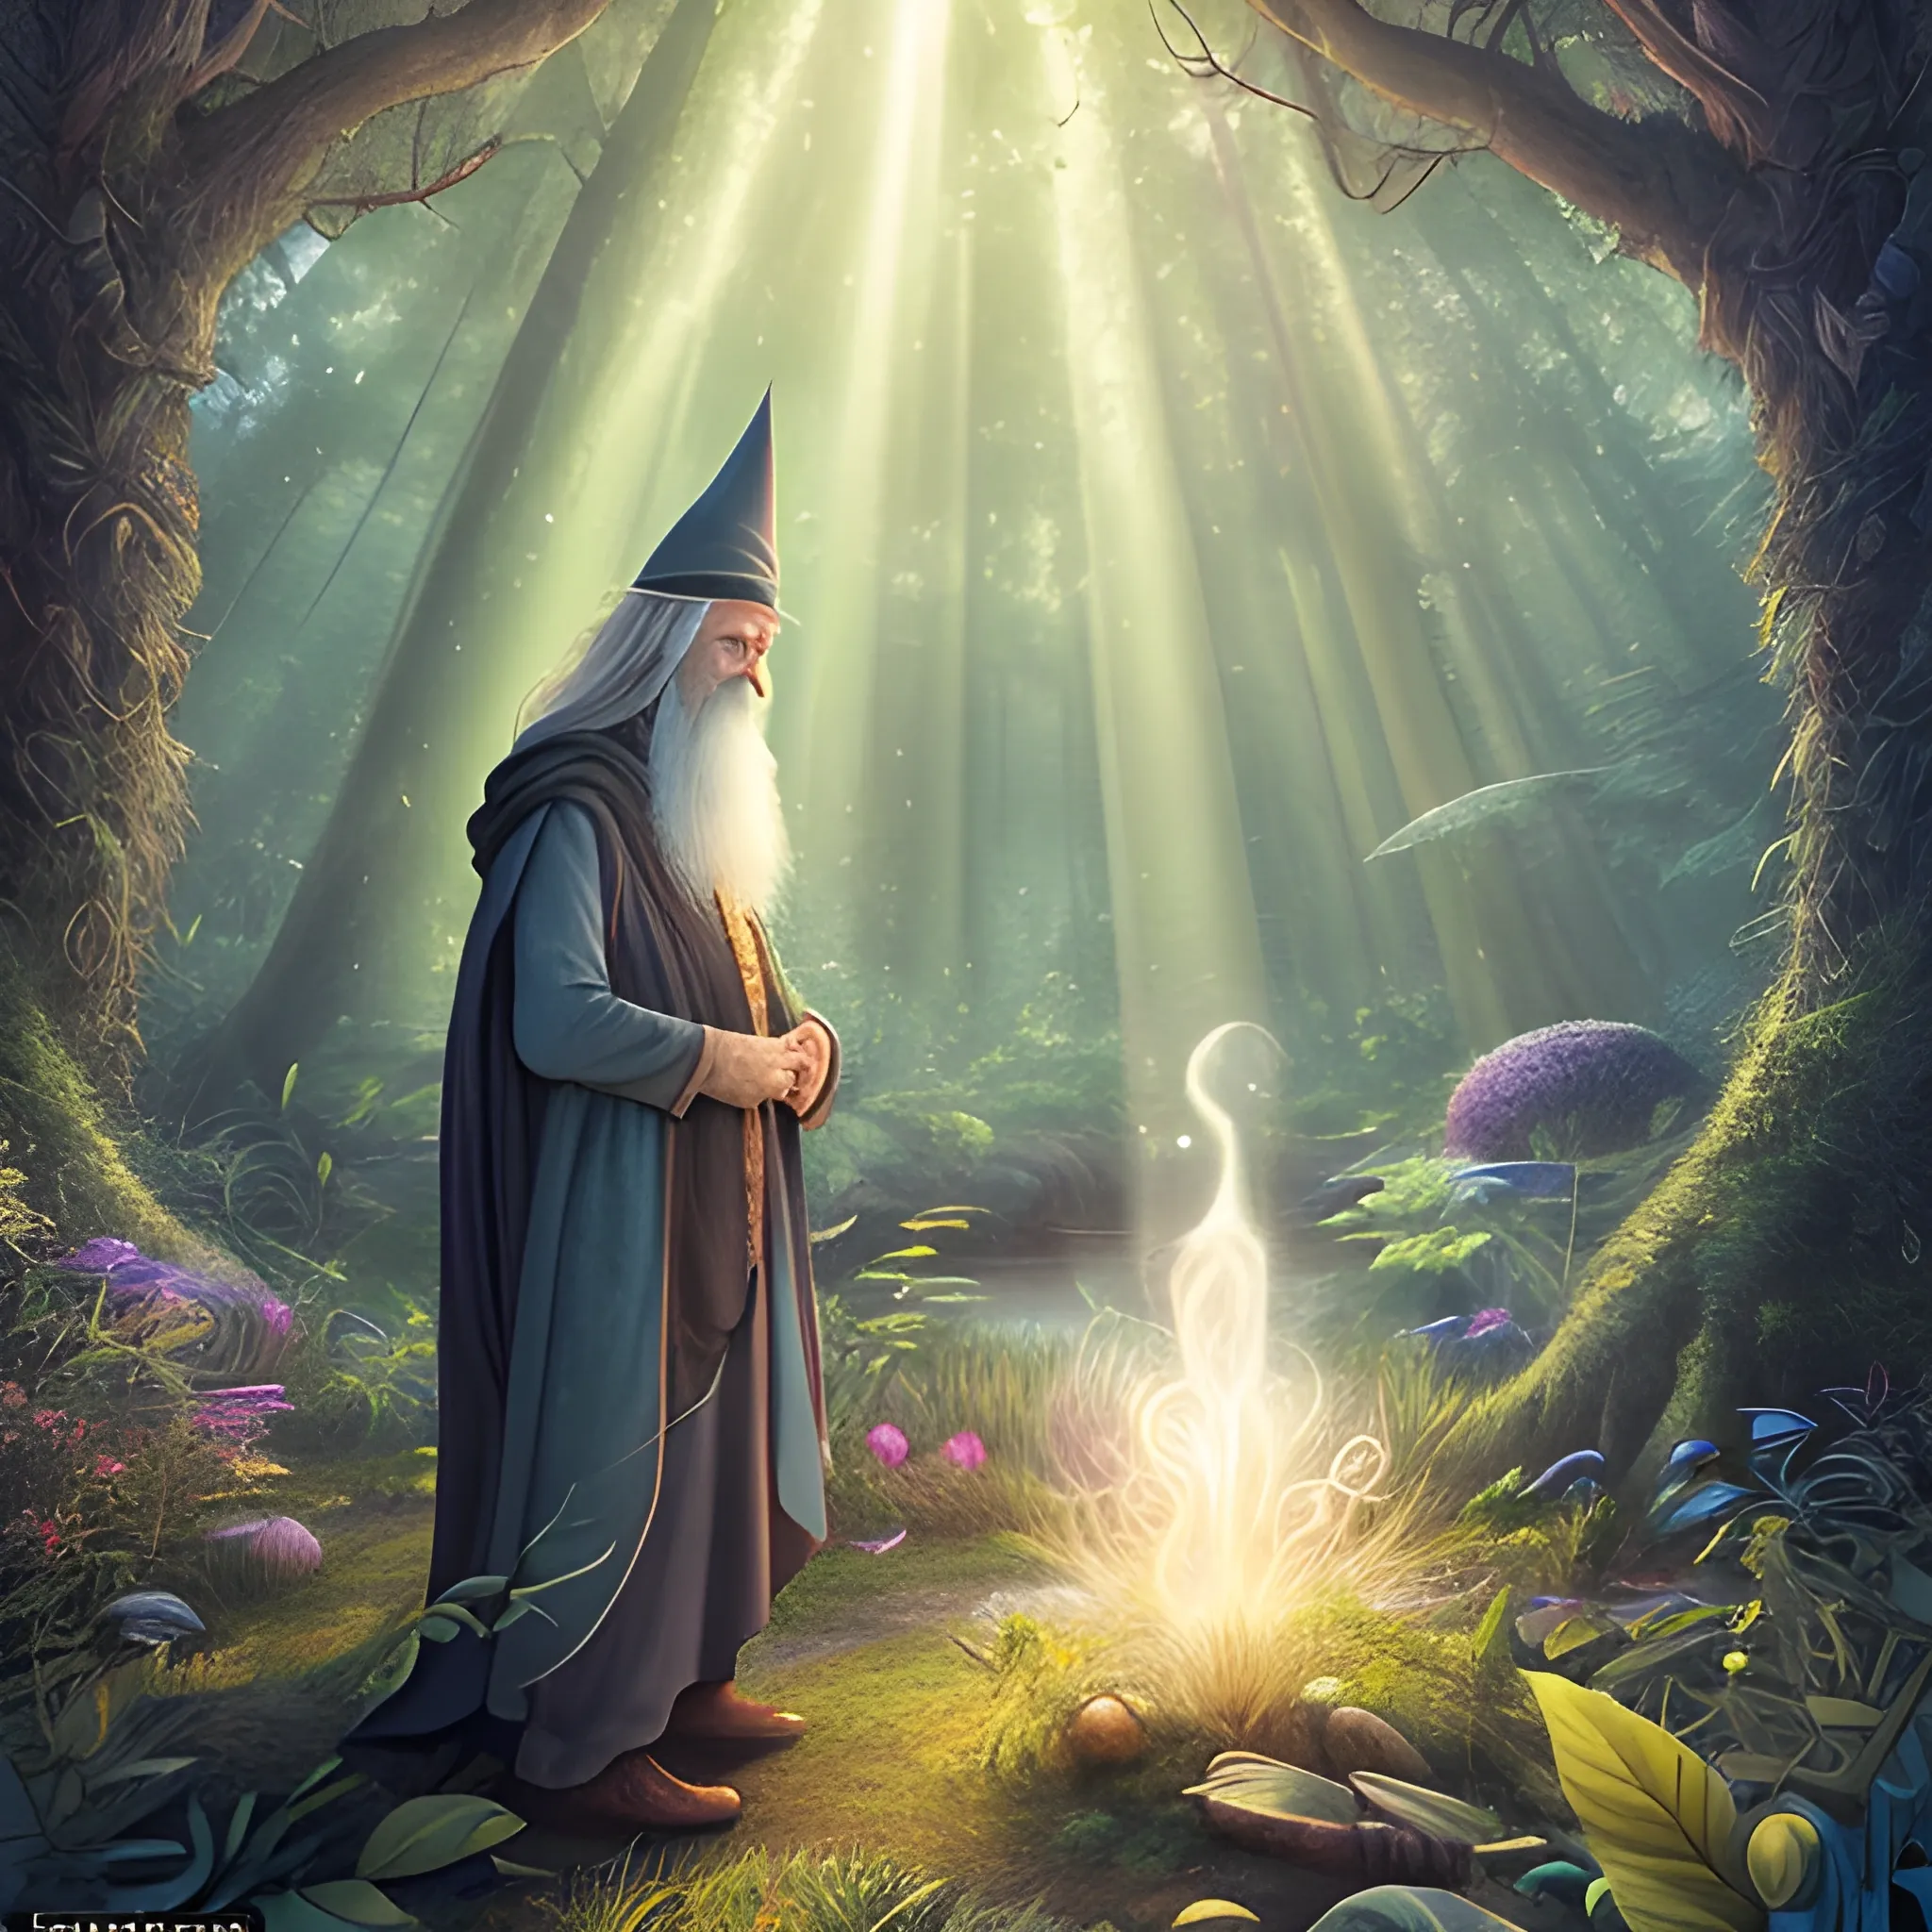 A photorealistic illustration depicting a wizard in a magical enchanted forest. The illustration showcases the wizards adorable and innocent appearance, surrounded by vibrant and enchanting elements of the magical forest and huge lake. The lighting in the scene adds a sense of wonder and mystery, with rays of sunlight filtering through the canopy of trees. The foliage and flora in the forest are depicted with rich colors and intricate details, creating a visually captivating environment. The illustration captures the emotions of the wizard, evoking a sense of curiosity, vulnerability, and the desire to find his way back home., Cartoon